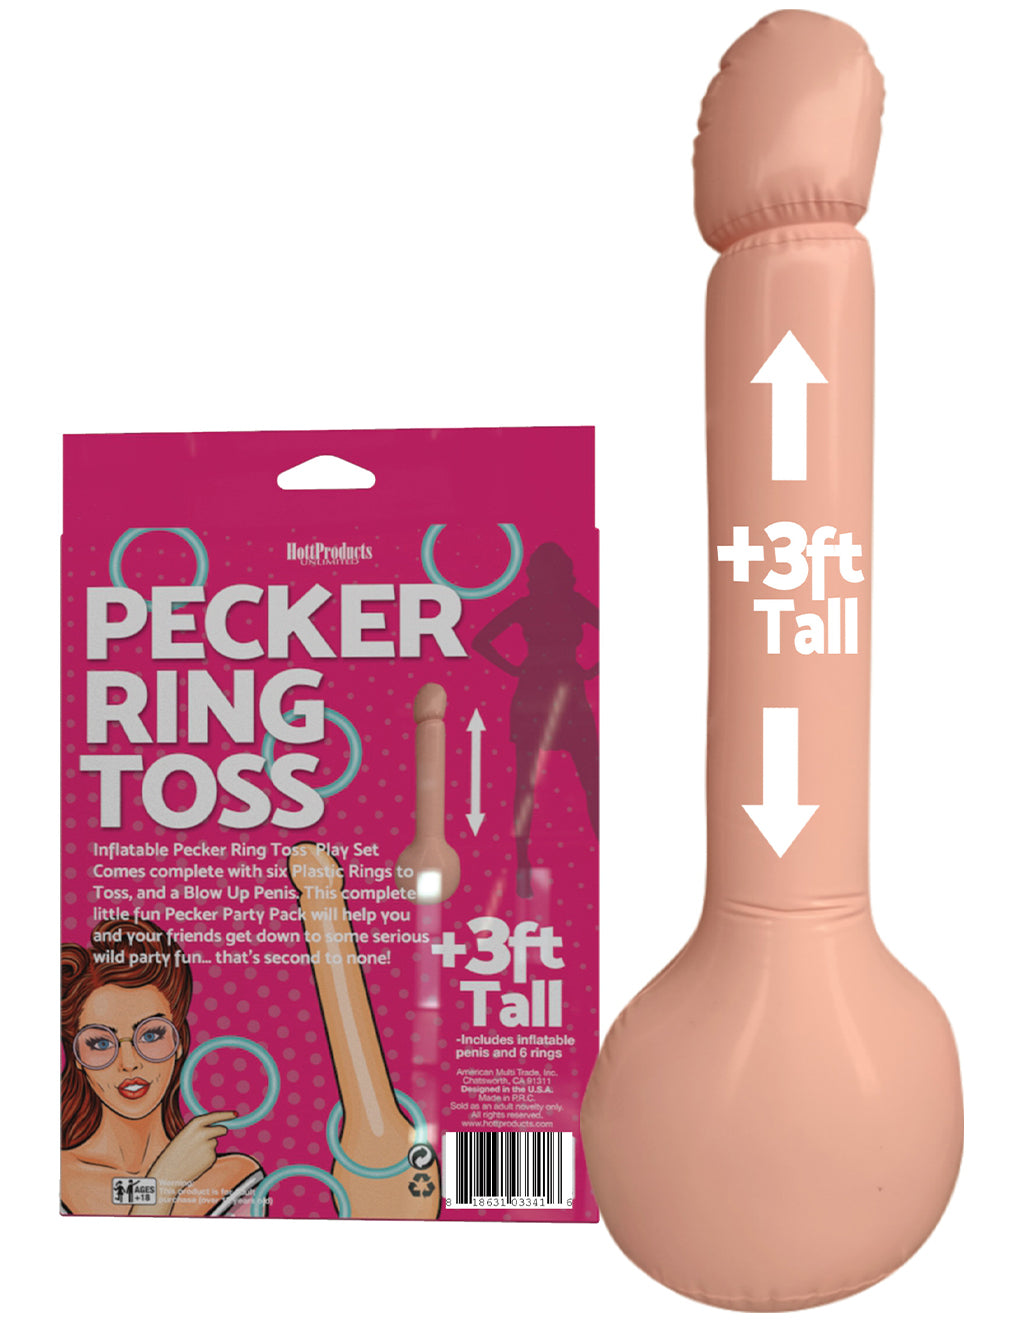 Inflatable Pecker Ring Toss Game- Back package- Details